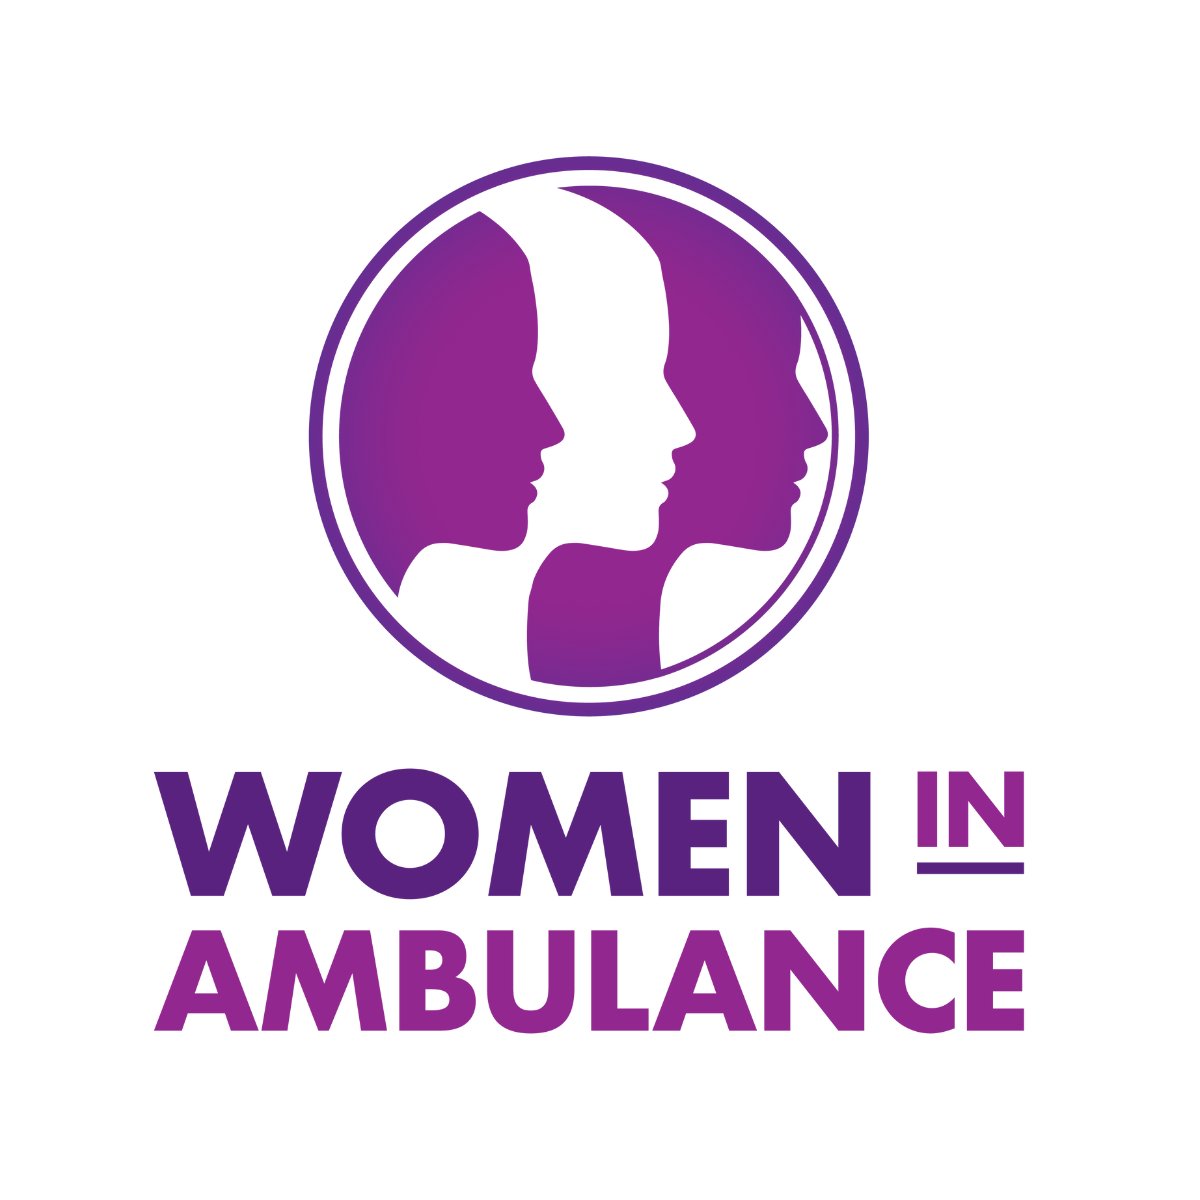 Congratulations to Anna, Debra, Millie, Pauline, Rachel, Sue, and all the amazing women nominated in this year's 2024 @CAAAustralasia Women in Ambulance Awards 🤩 Find out more online brnw.ch/21wHGgc #WomenInAmbulance #InternationalWomensDay #StJohn #IWD24 #NewZealand